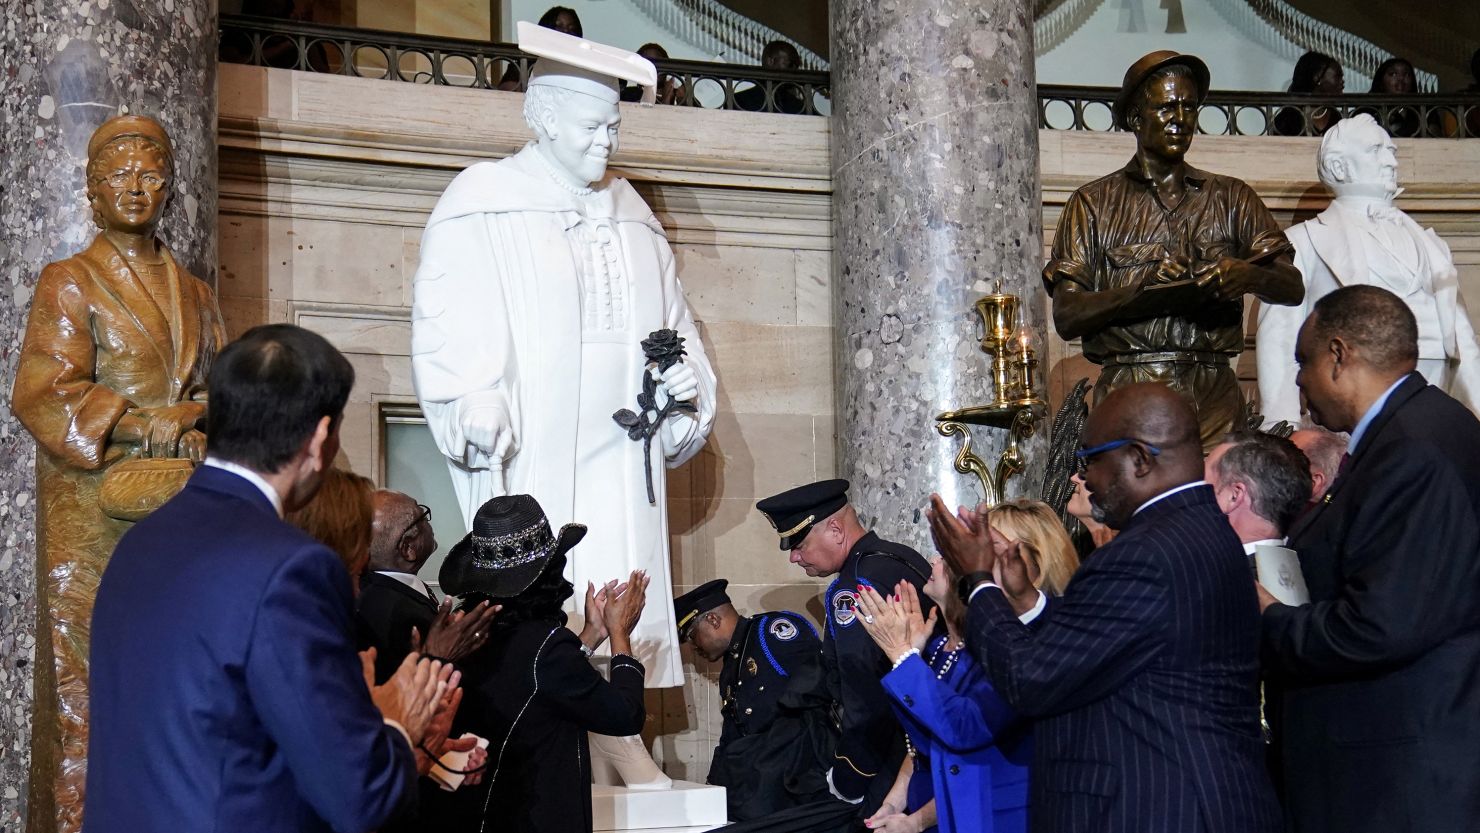 Congressional leadership and family members unveil a statue on Wednesday of Dr Mary McLeod Bethune in Statuary Hall at the U.S. Capitol in Washington.